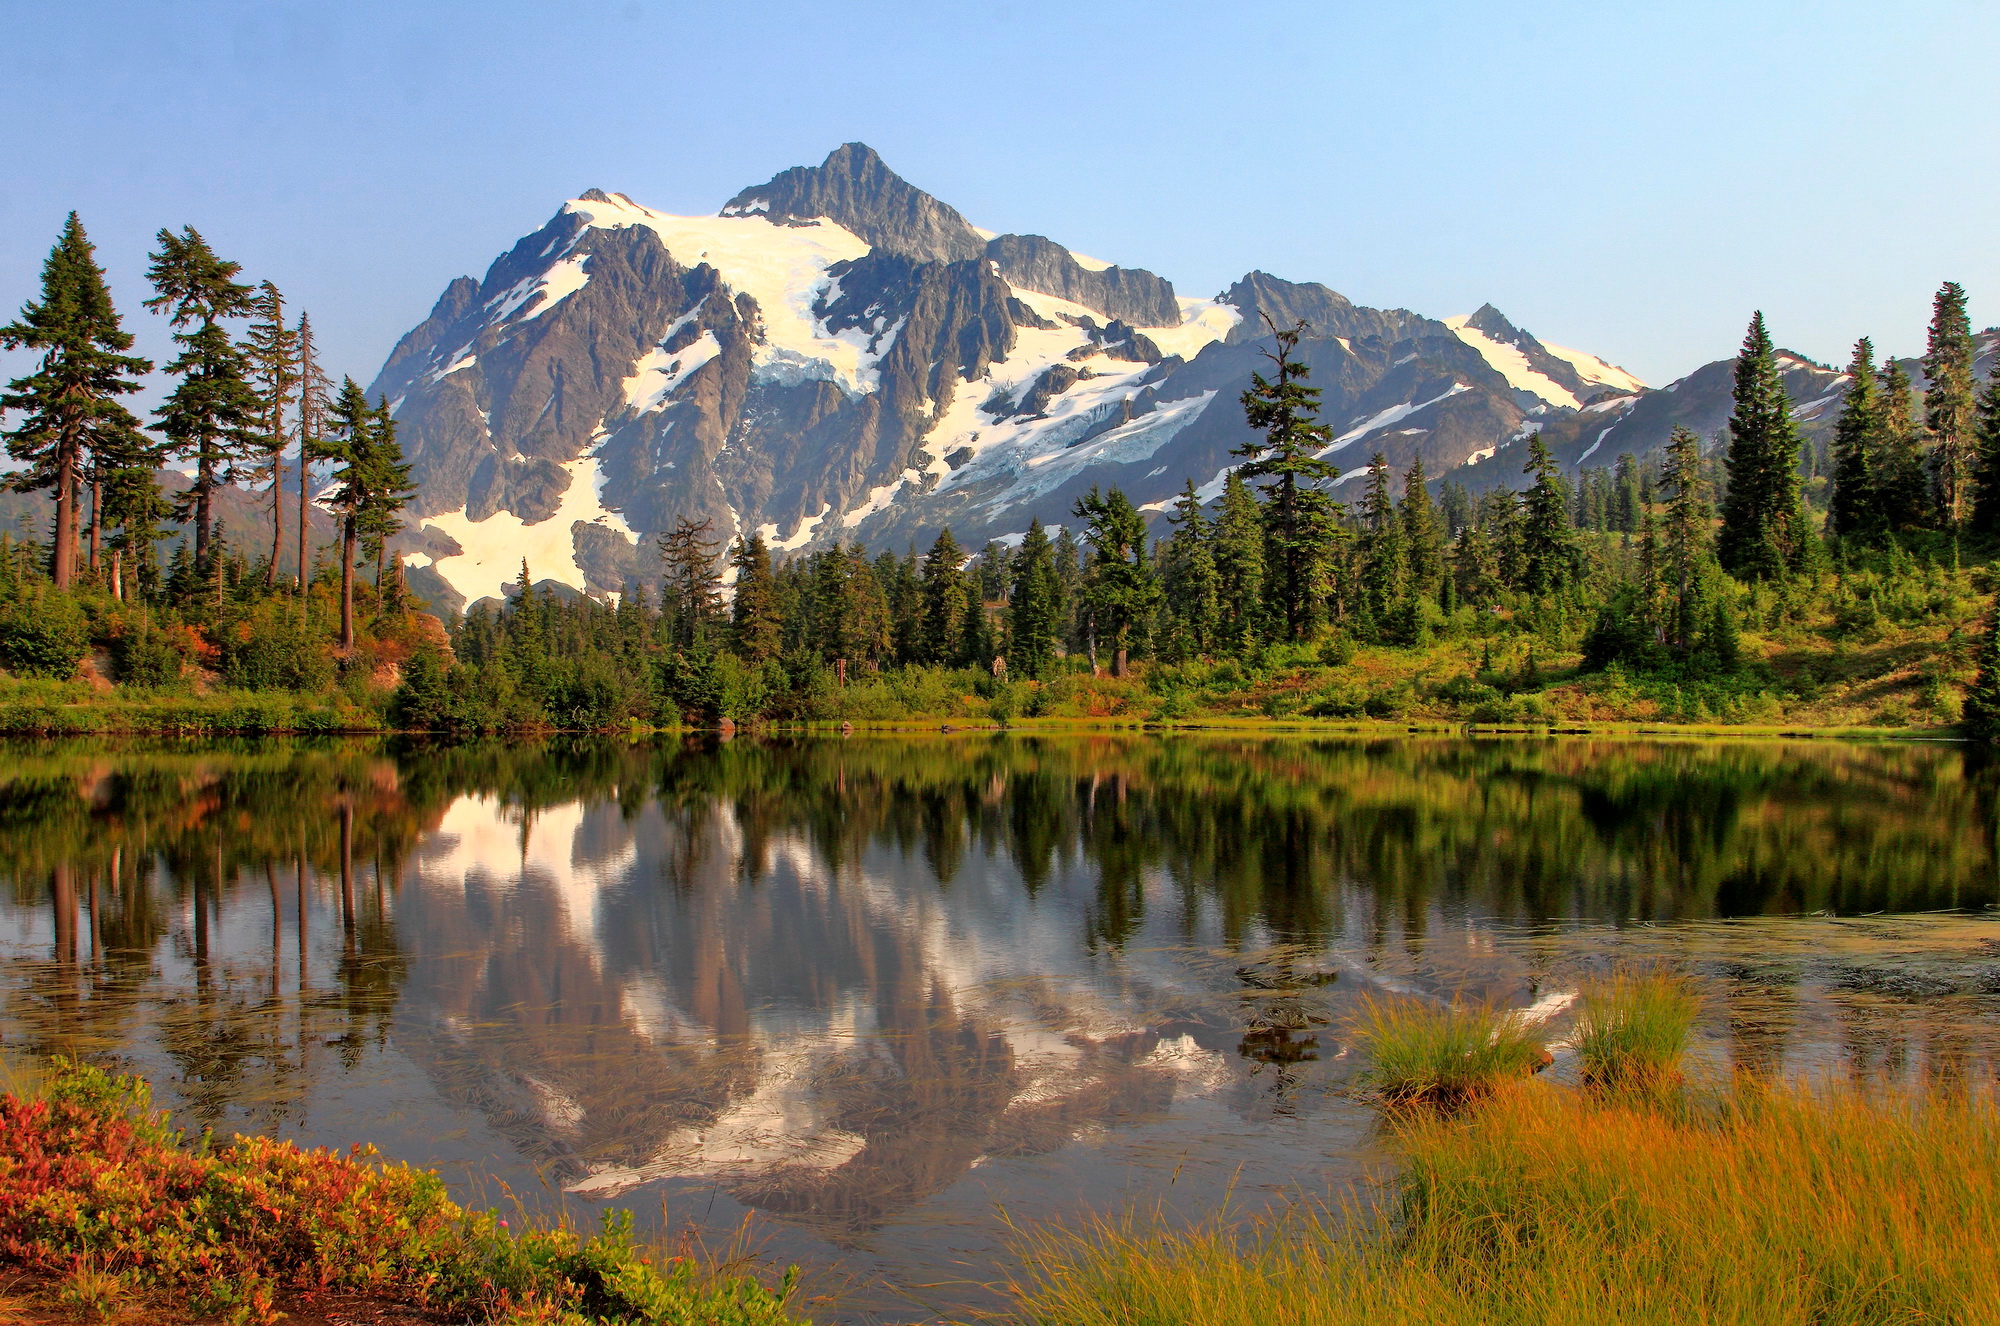 Picture Lake Triptych by Howard Clark, Art Exhibit at Brookside Gardens, Mt. Shuksan viewed from Mt. Baker Scenic Byway, WA, 